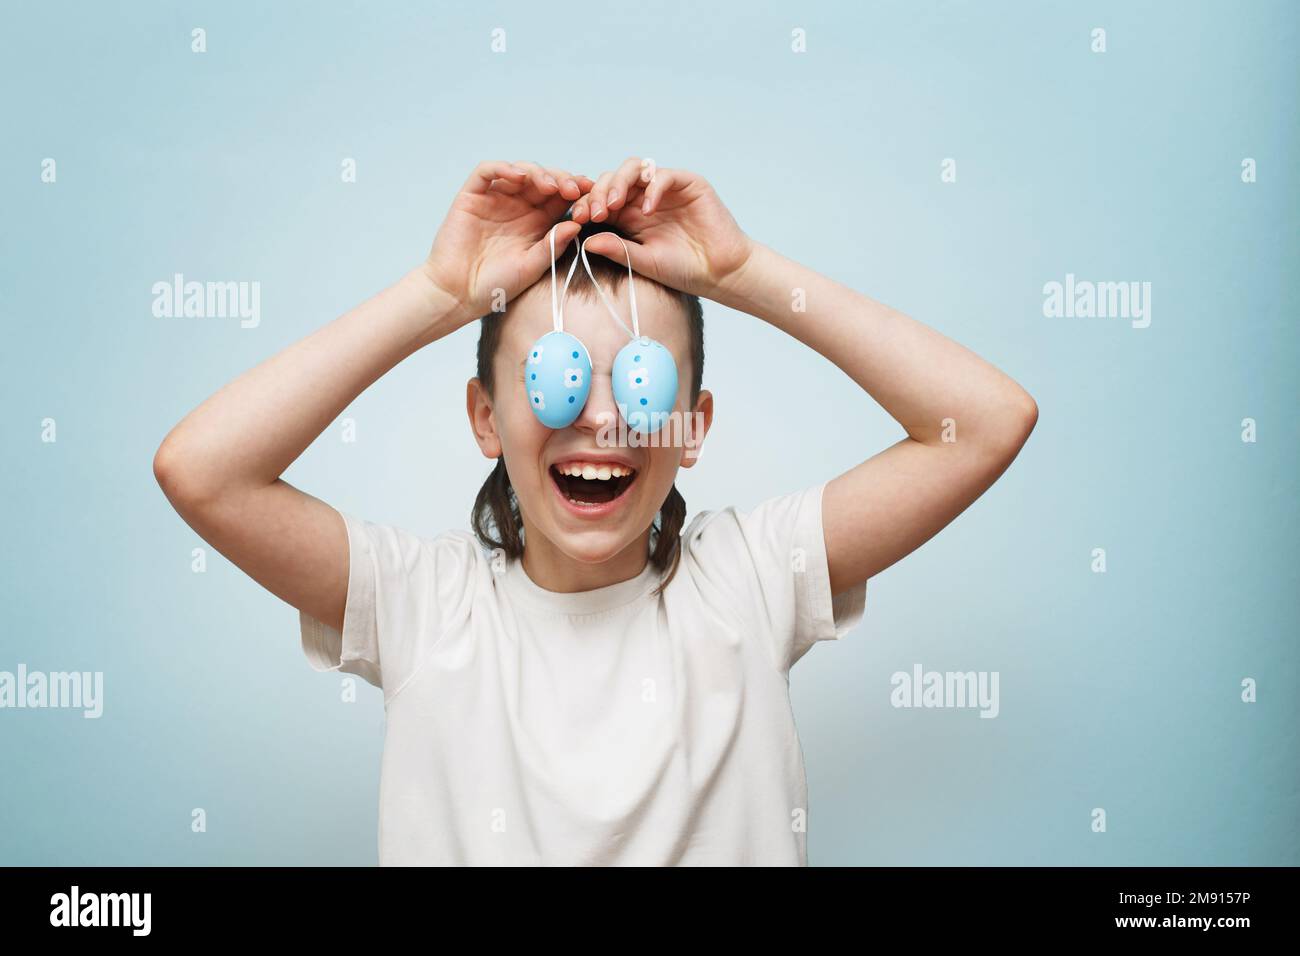 young smiling boy holding Easter eggs in his hand and covering his eyes with it on a blue background. Stock Photo